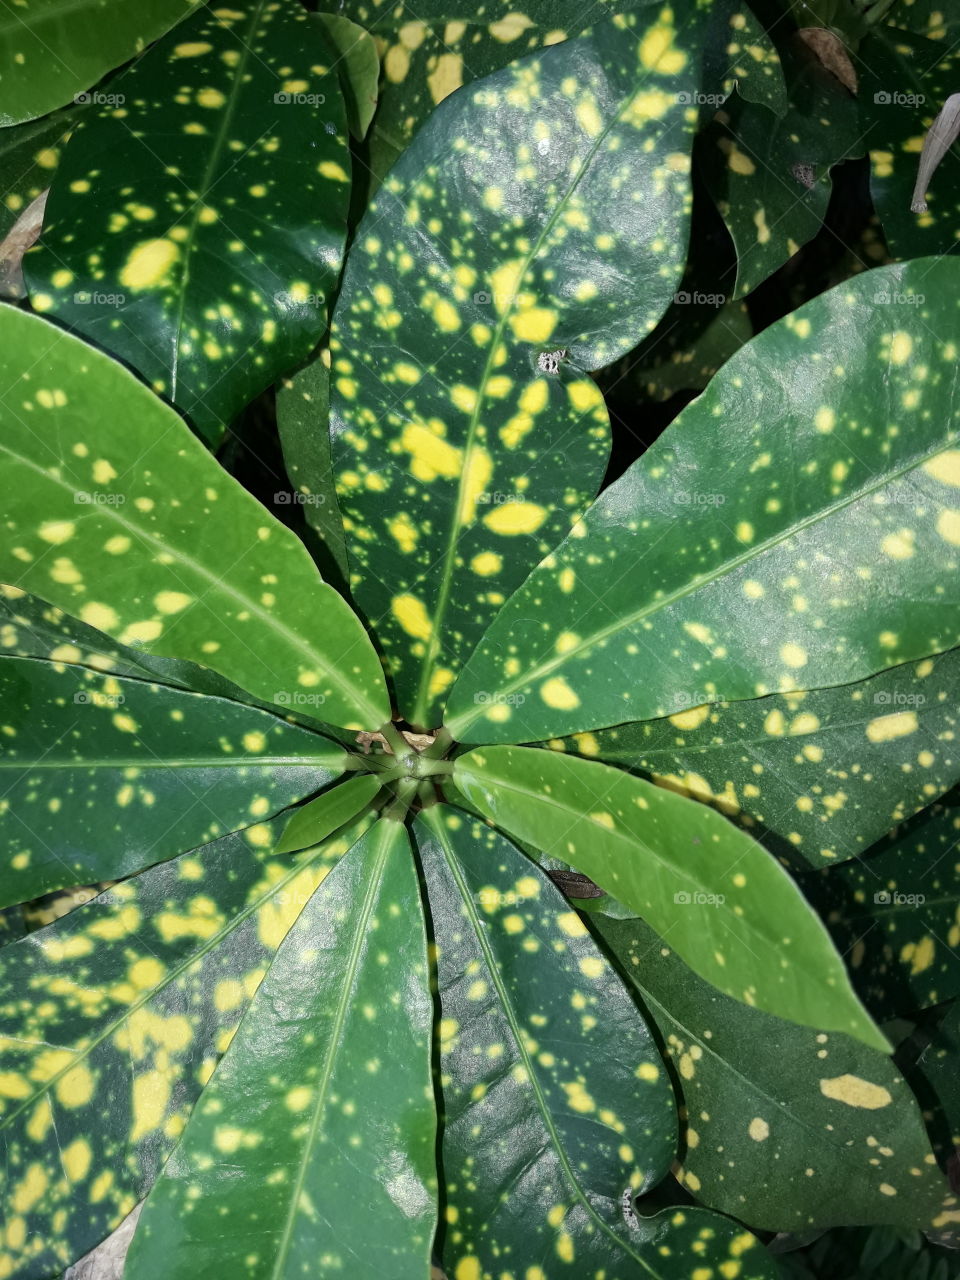 special leaf has yellow dot spread all over them.